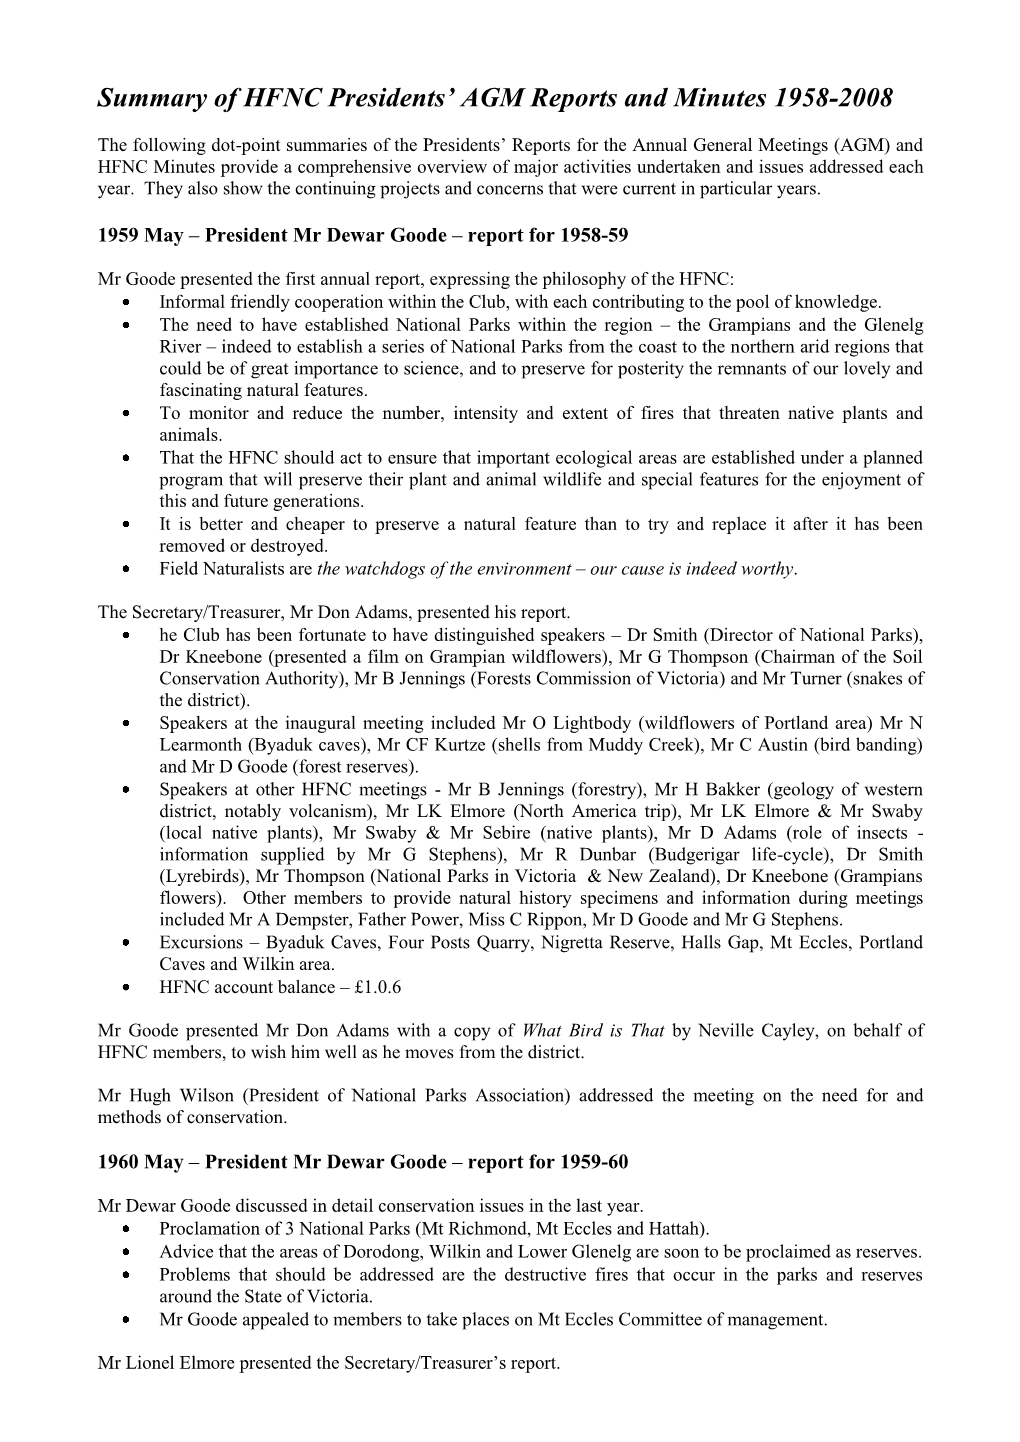 Summary of HFNC Presidents' AGM Reports and Minutes 1958-2008